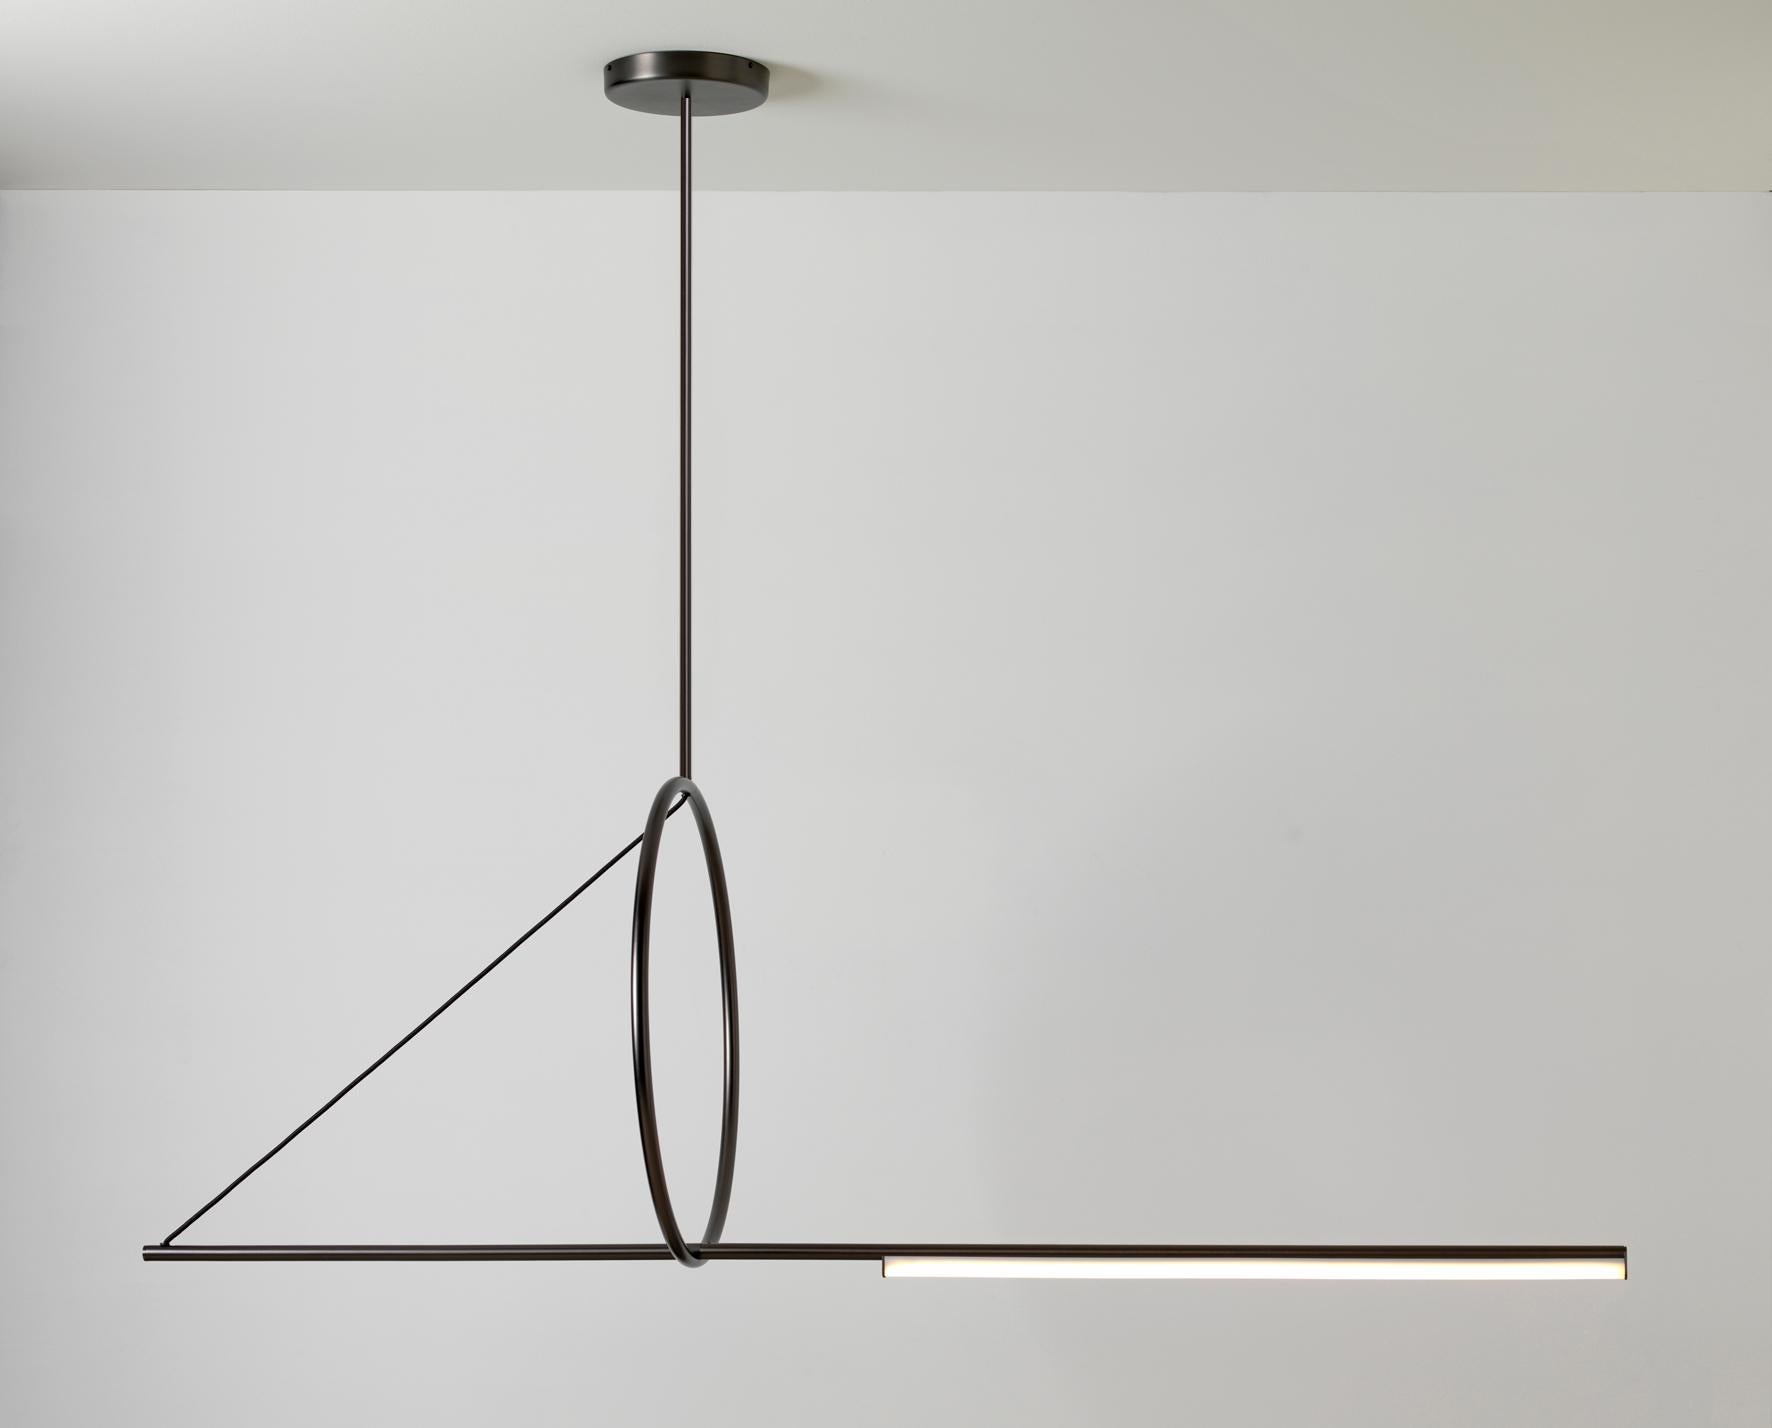 Cercle & Trait XL Pendant by Pool
Dimensions: D175.5 x W20 X H163.3 cm
Materials: Solid Brass, Polycarbonate, Textile cable (1m).
Others finishes and dimensions are available.

All our lamps can be wired according to each country. If sold to